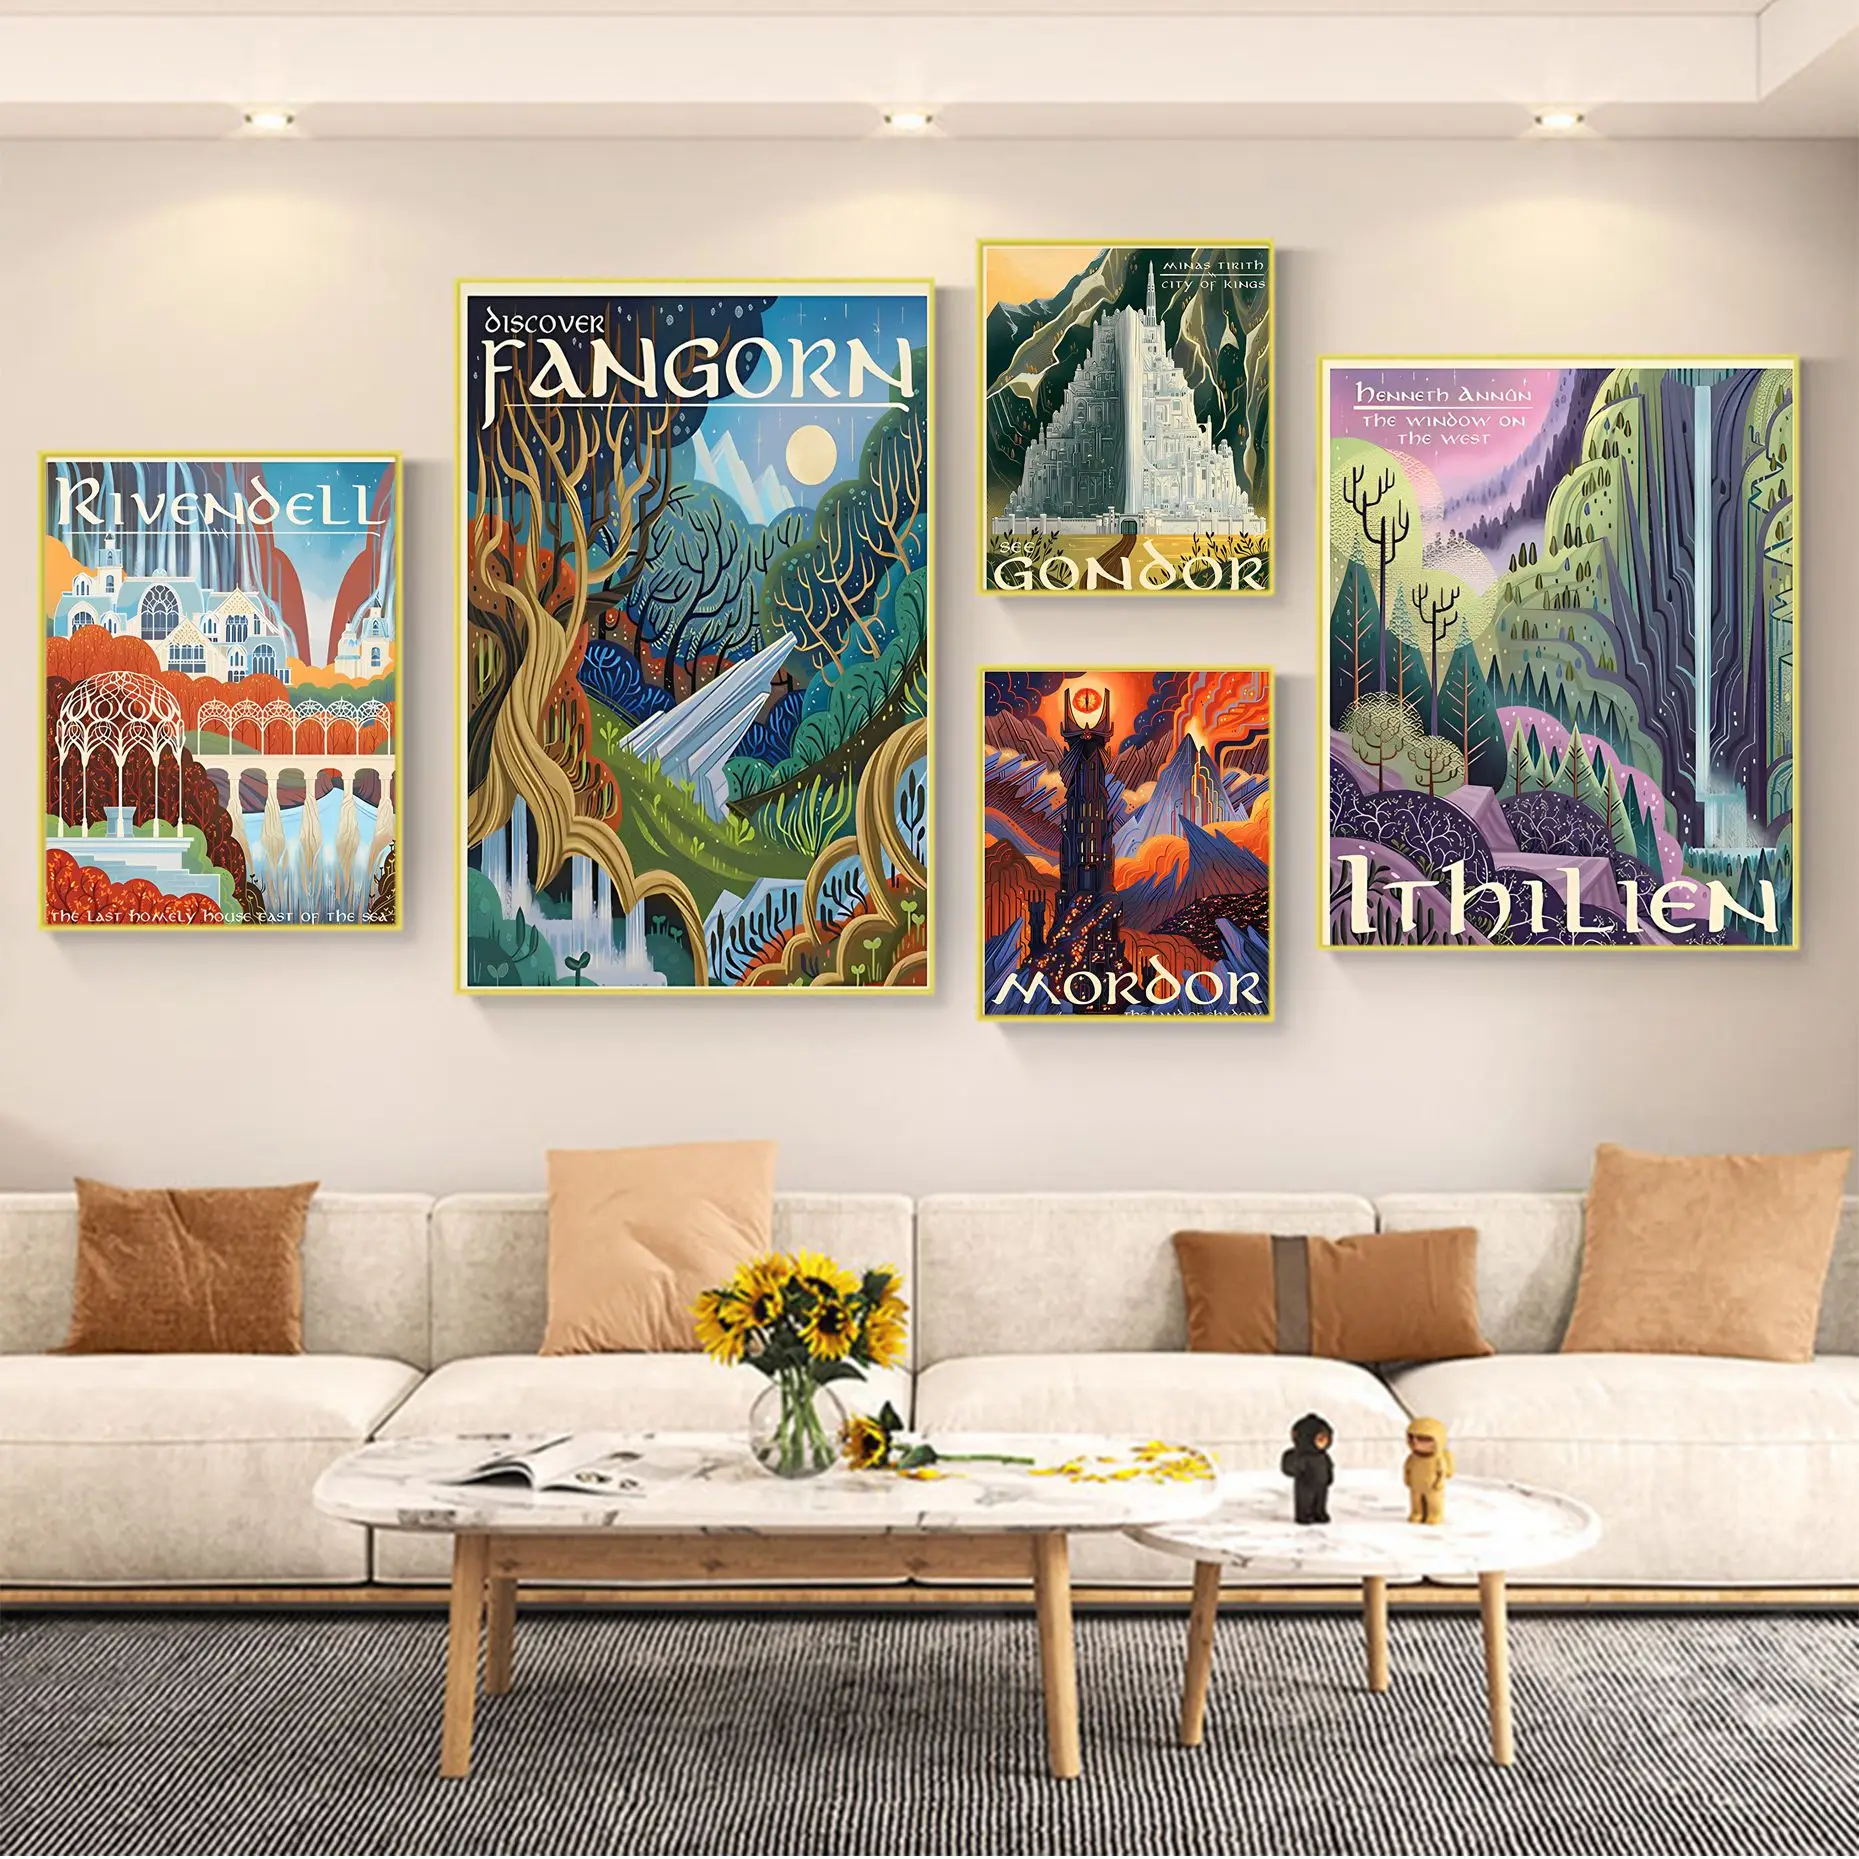 

Ring Art PosterVintage Film Mordor Castle Lord Magic Classic Movie Posters Retro Paper Sticker DIY Room Cafe Nordic Home Decor